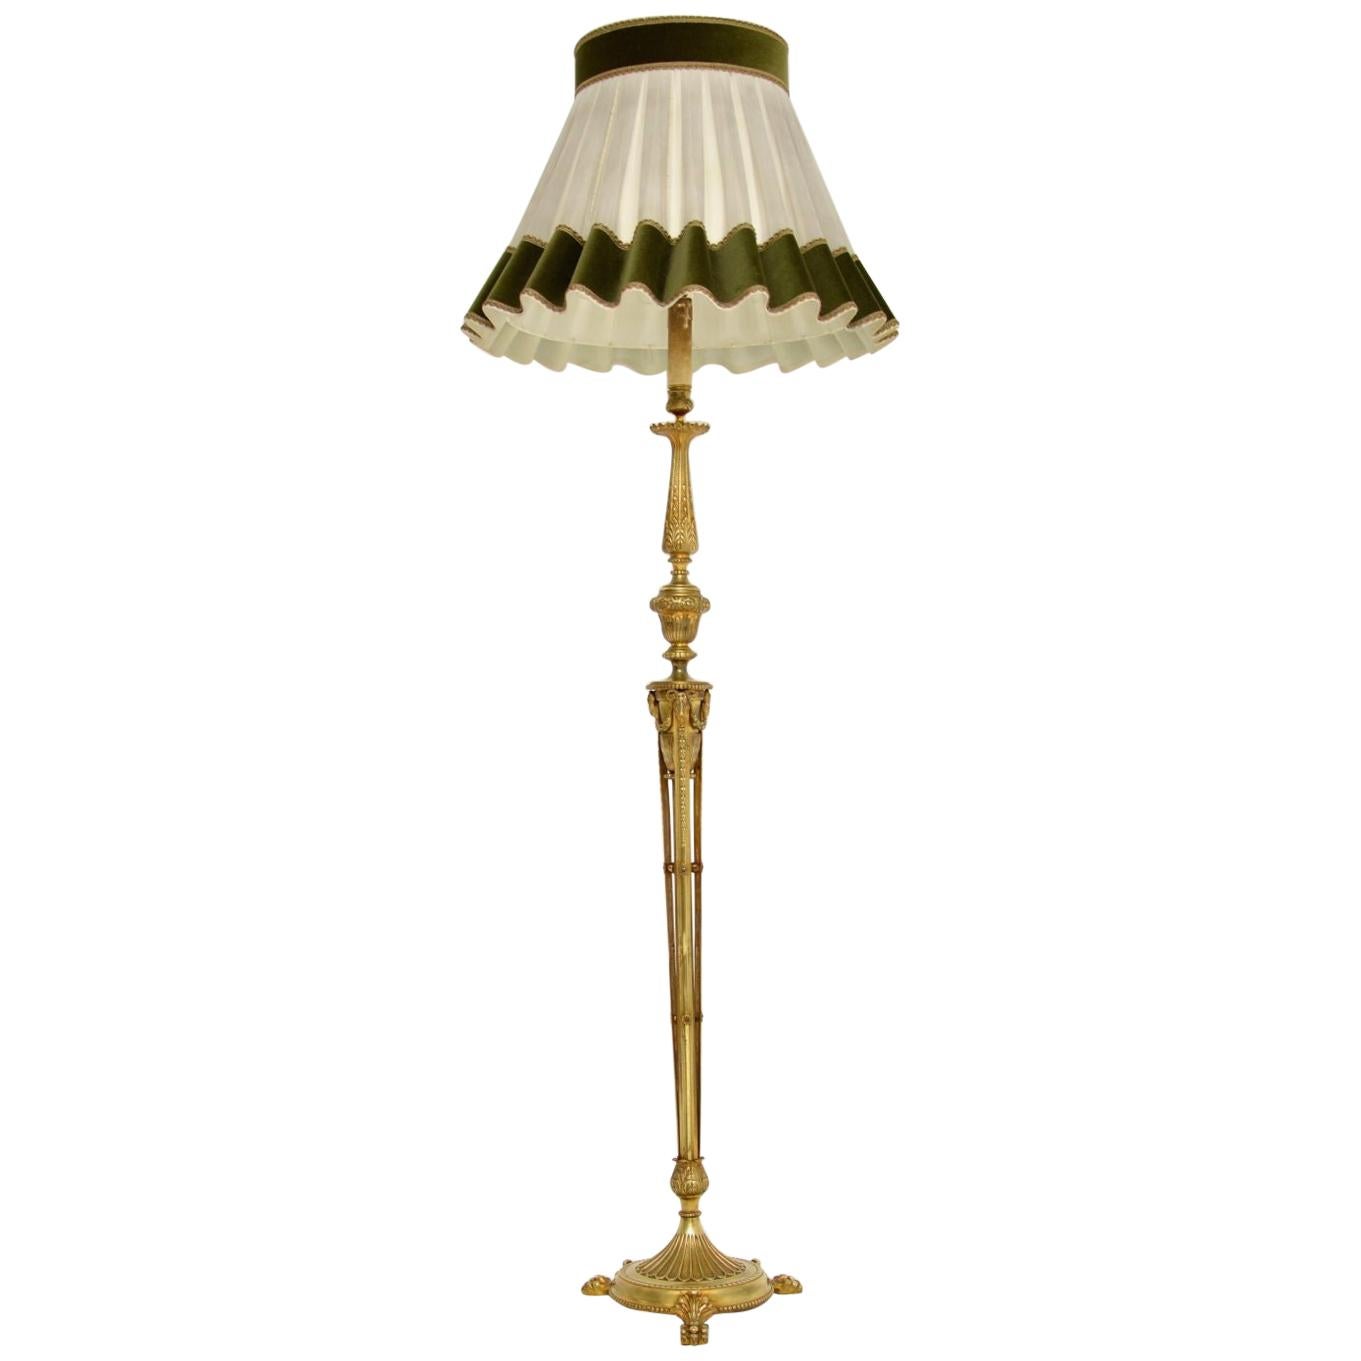 Antique Neoclassical French Gilt Brass Floor Lamp